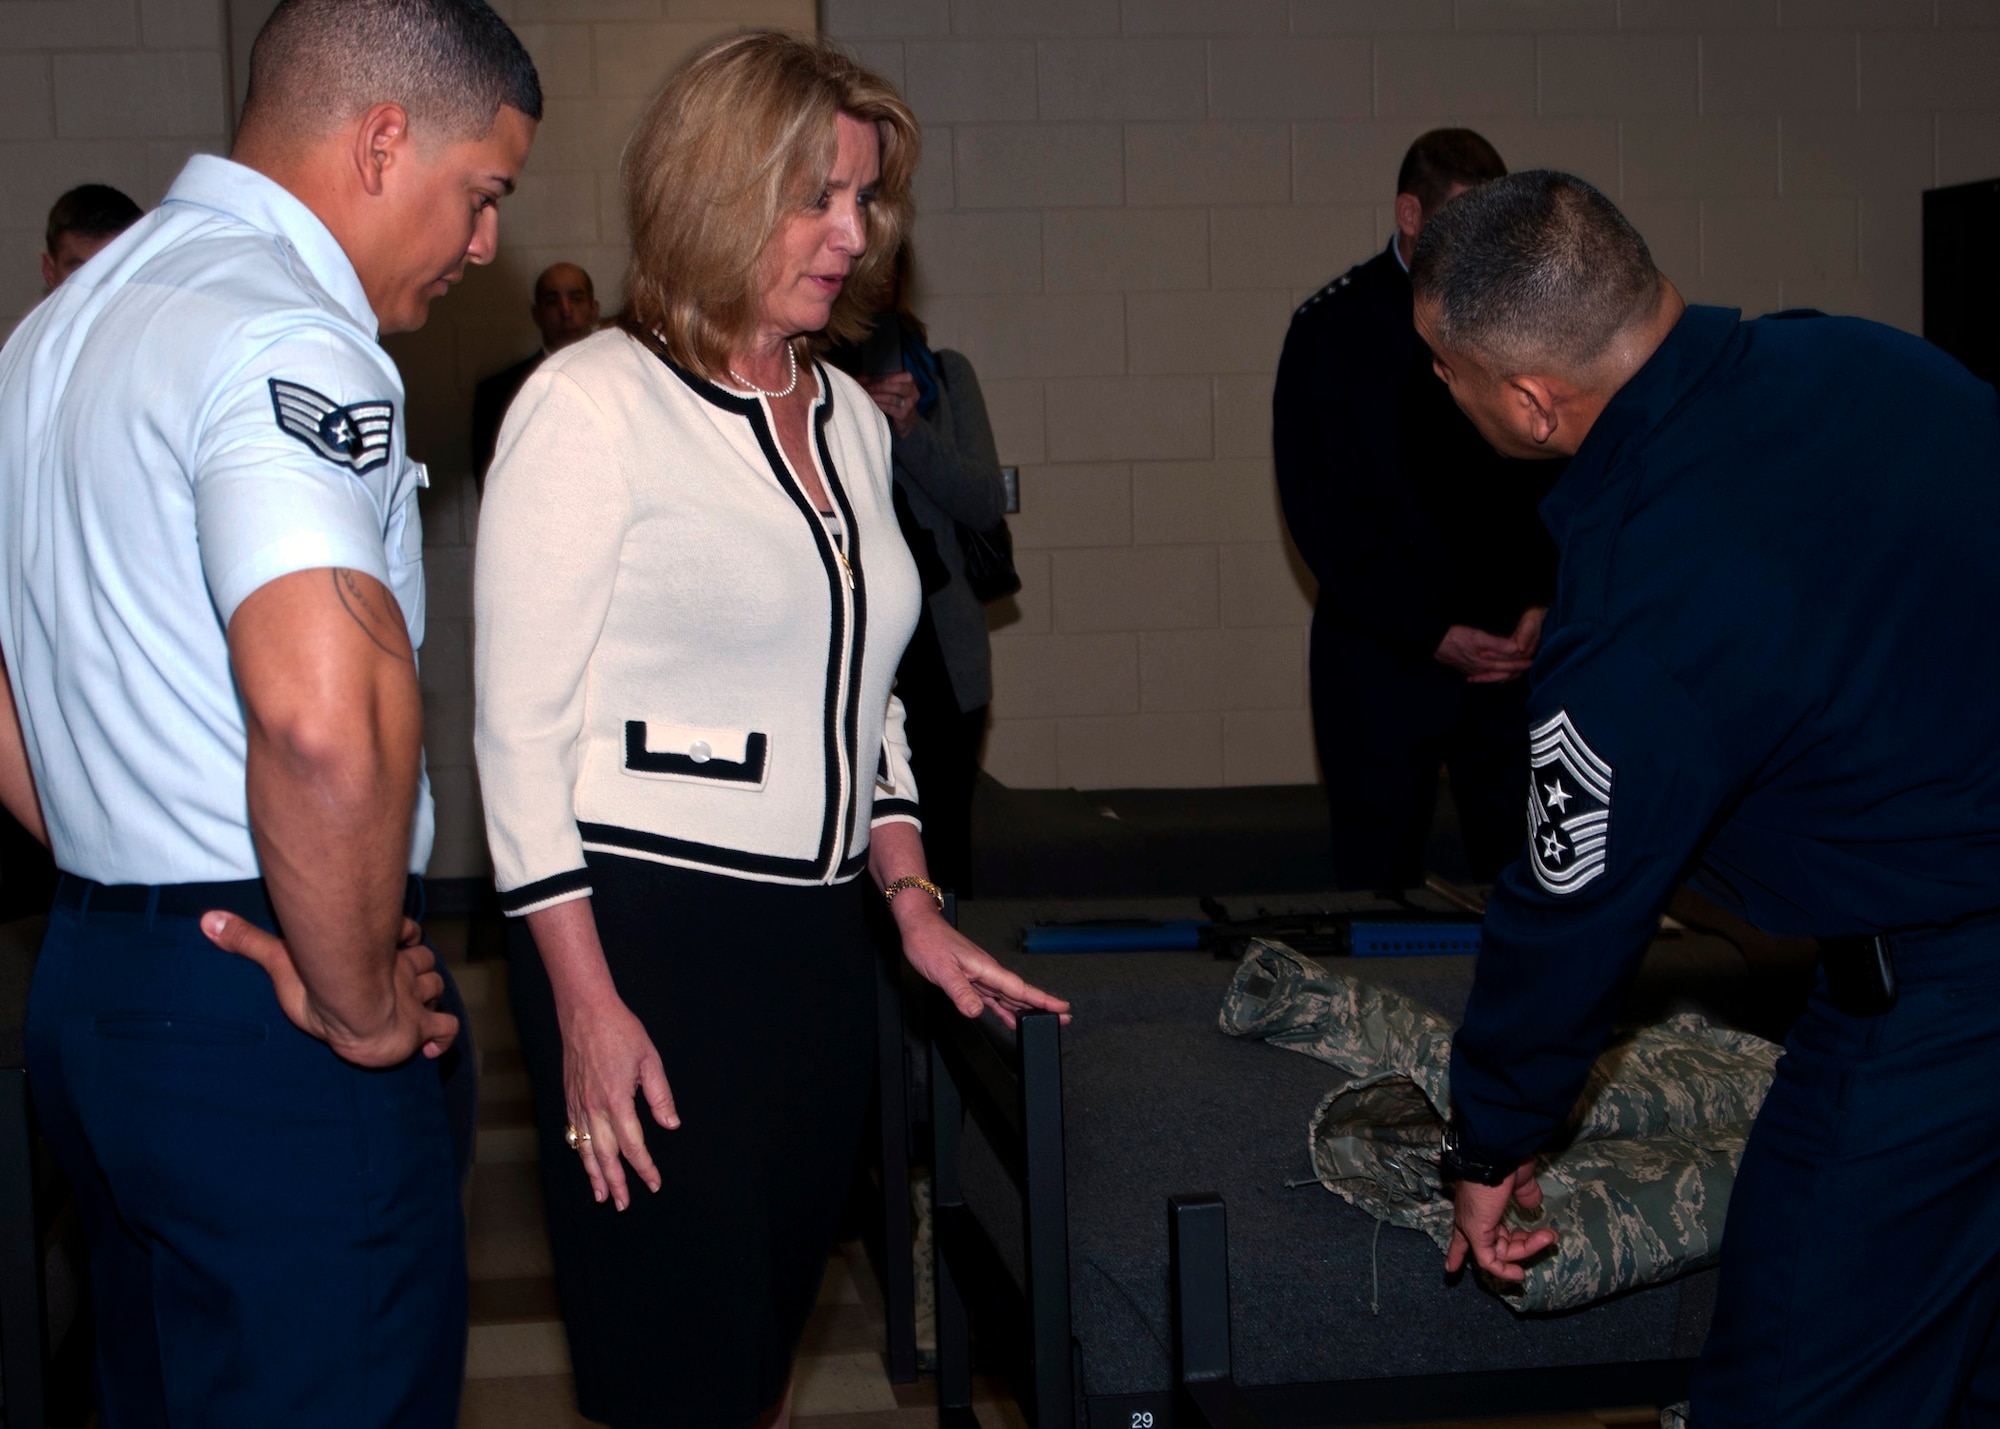 Tech. Sgt. Christian Pagan-Guzman, a basic military training instructor with the 323rd Training Squadron, left, and Chief Master Sgt. Gerardo Tapia, command chief, Air Education and Training Command, show Secretary of the Air Force Deborah Lee James the liner jacket issued to basic trainees during the SecAF’s visit to Joint Base San Antonio-Lackland Jan. 31. (U.S. Air Force photo by Staff Sgt. Marissa Tucker)